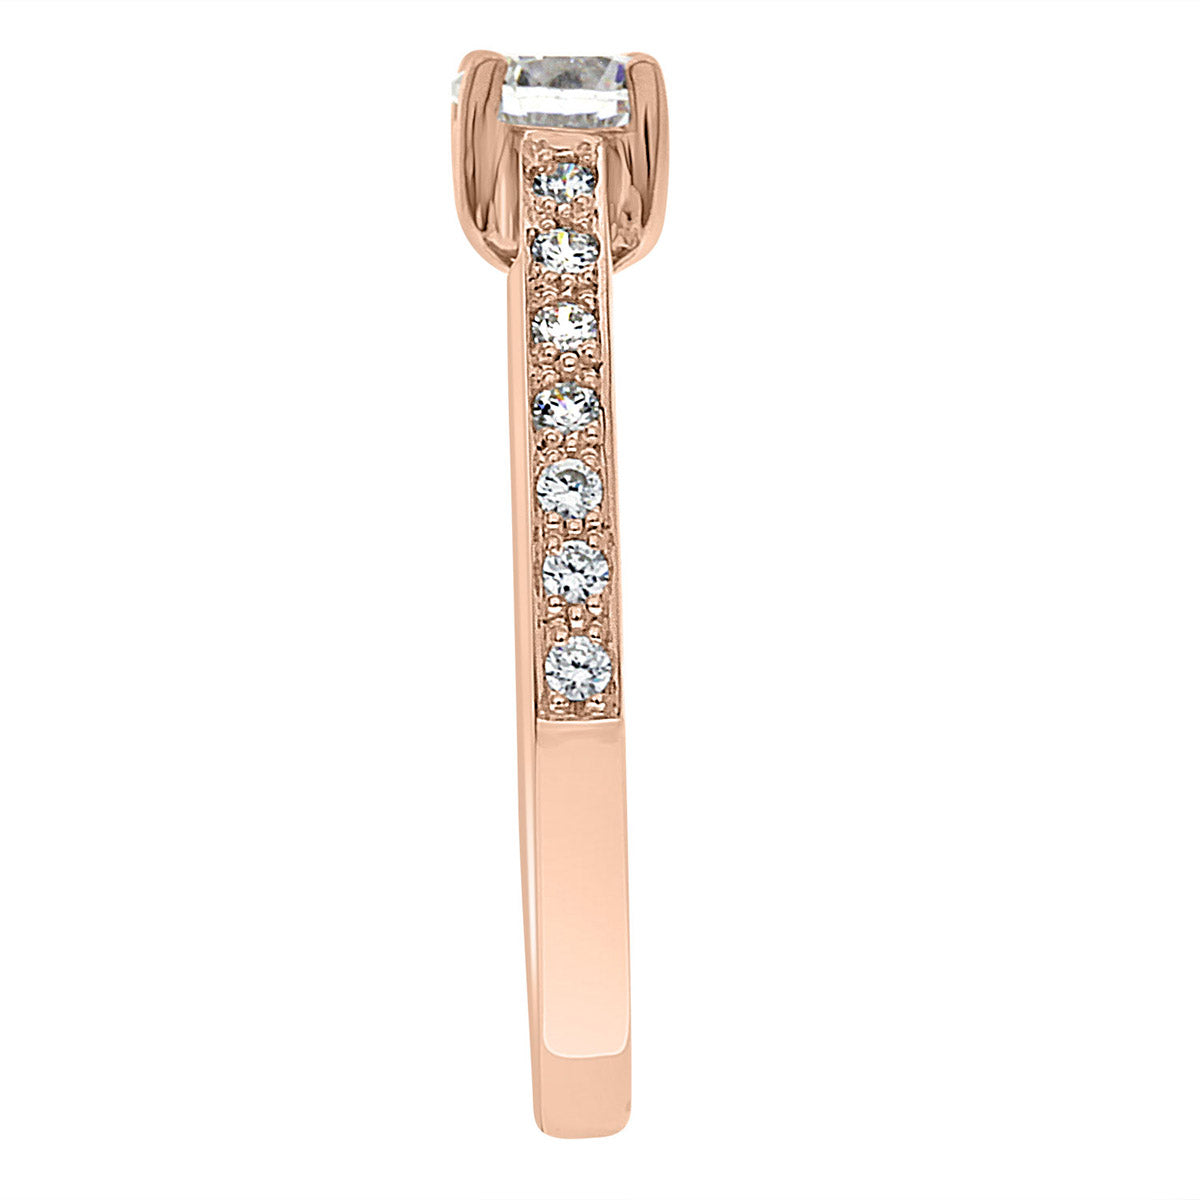 Pavé Diamond Ring manufactured in rose gold  standing vertical and viewed from the side